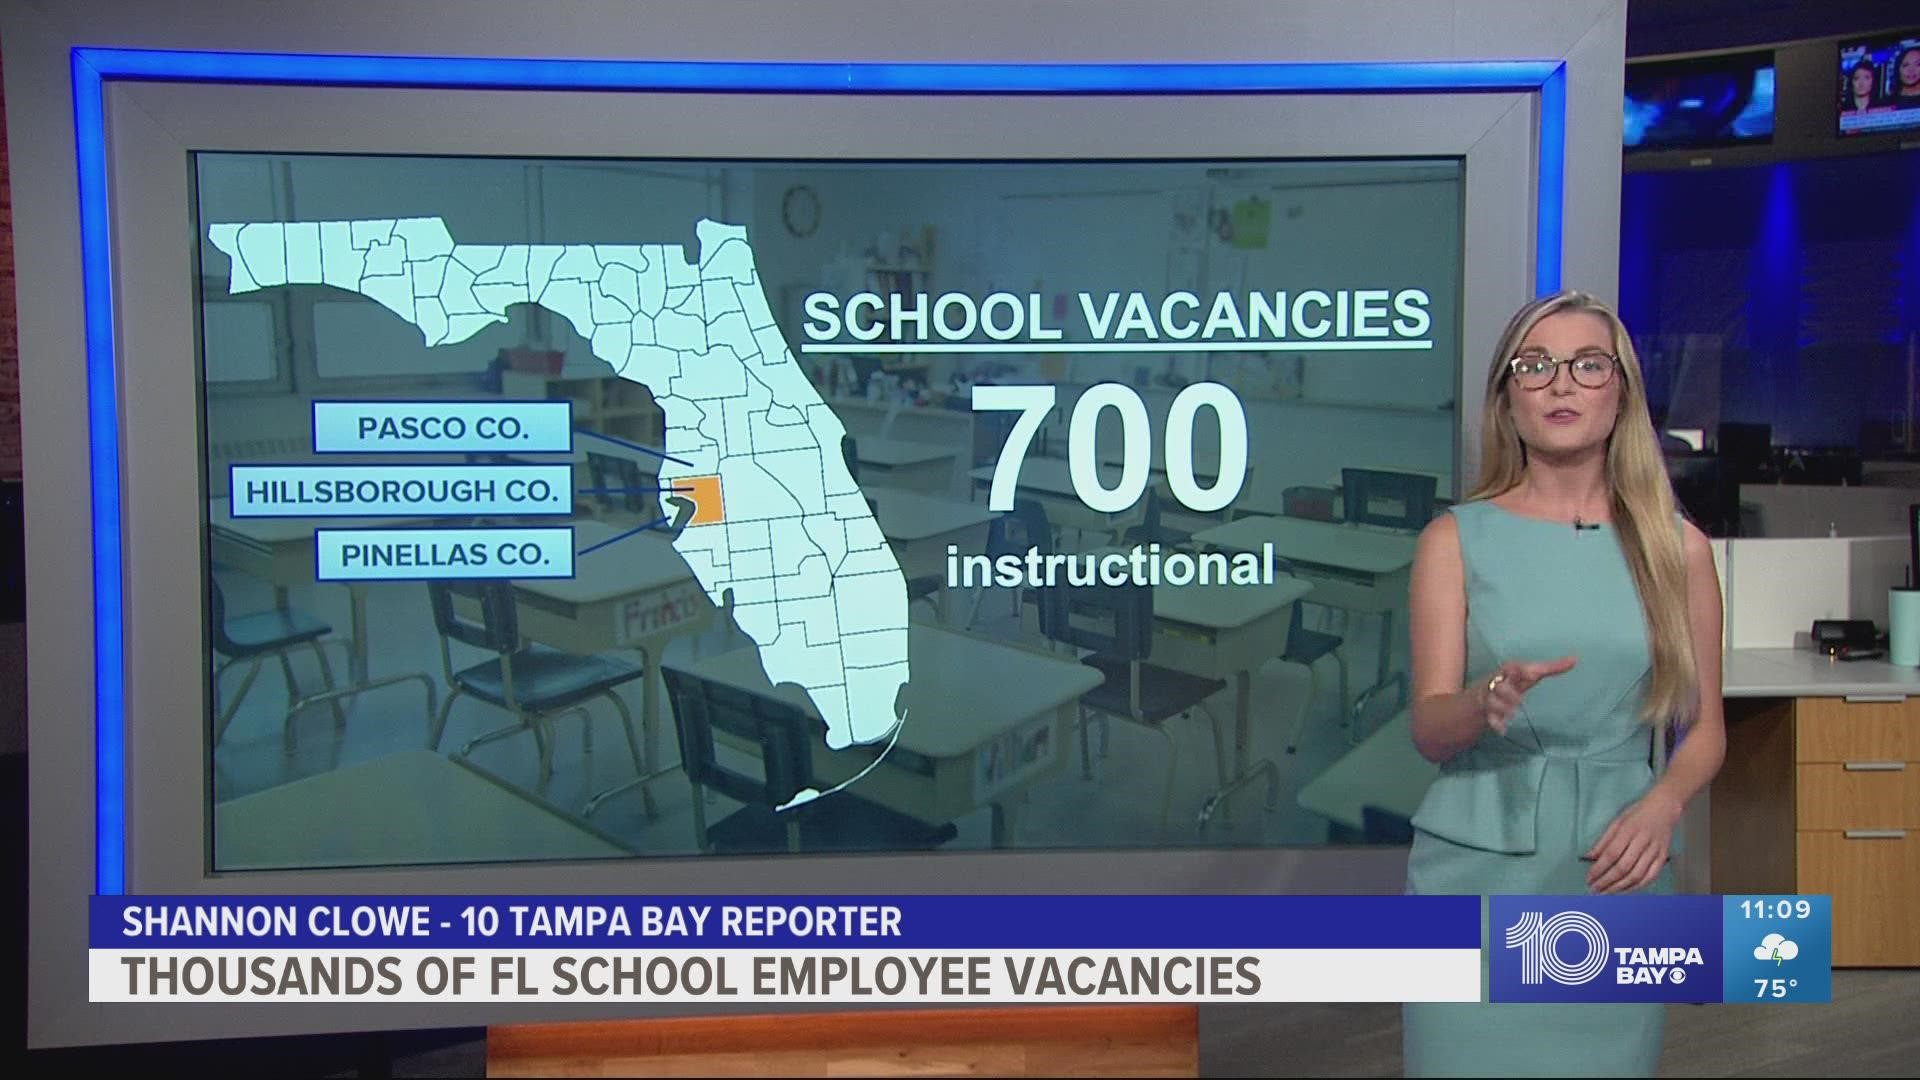 Public schools throughout the state of Florida are experiencing teacher shortages as school starts in less than a month.